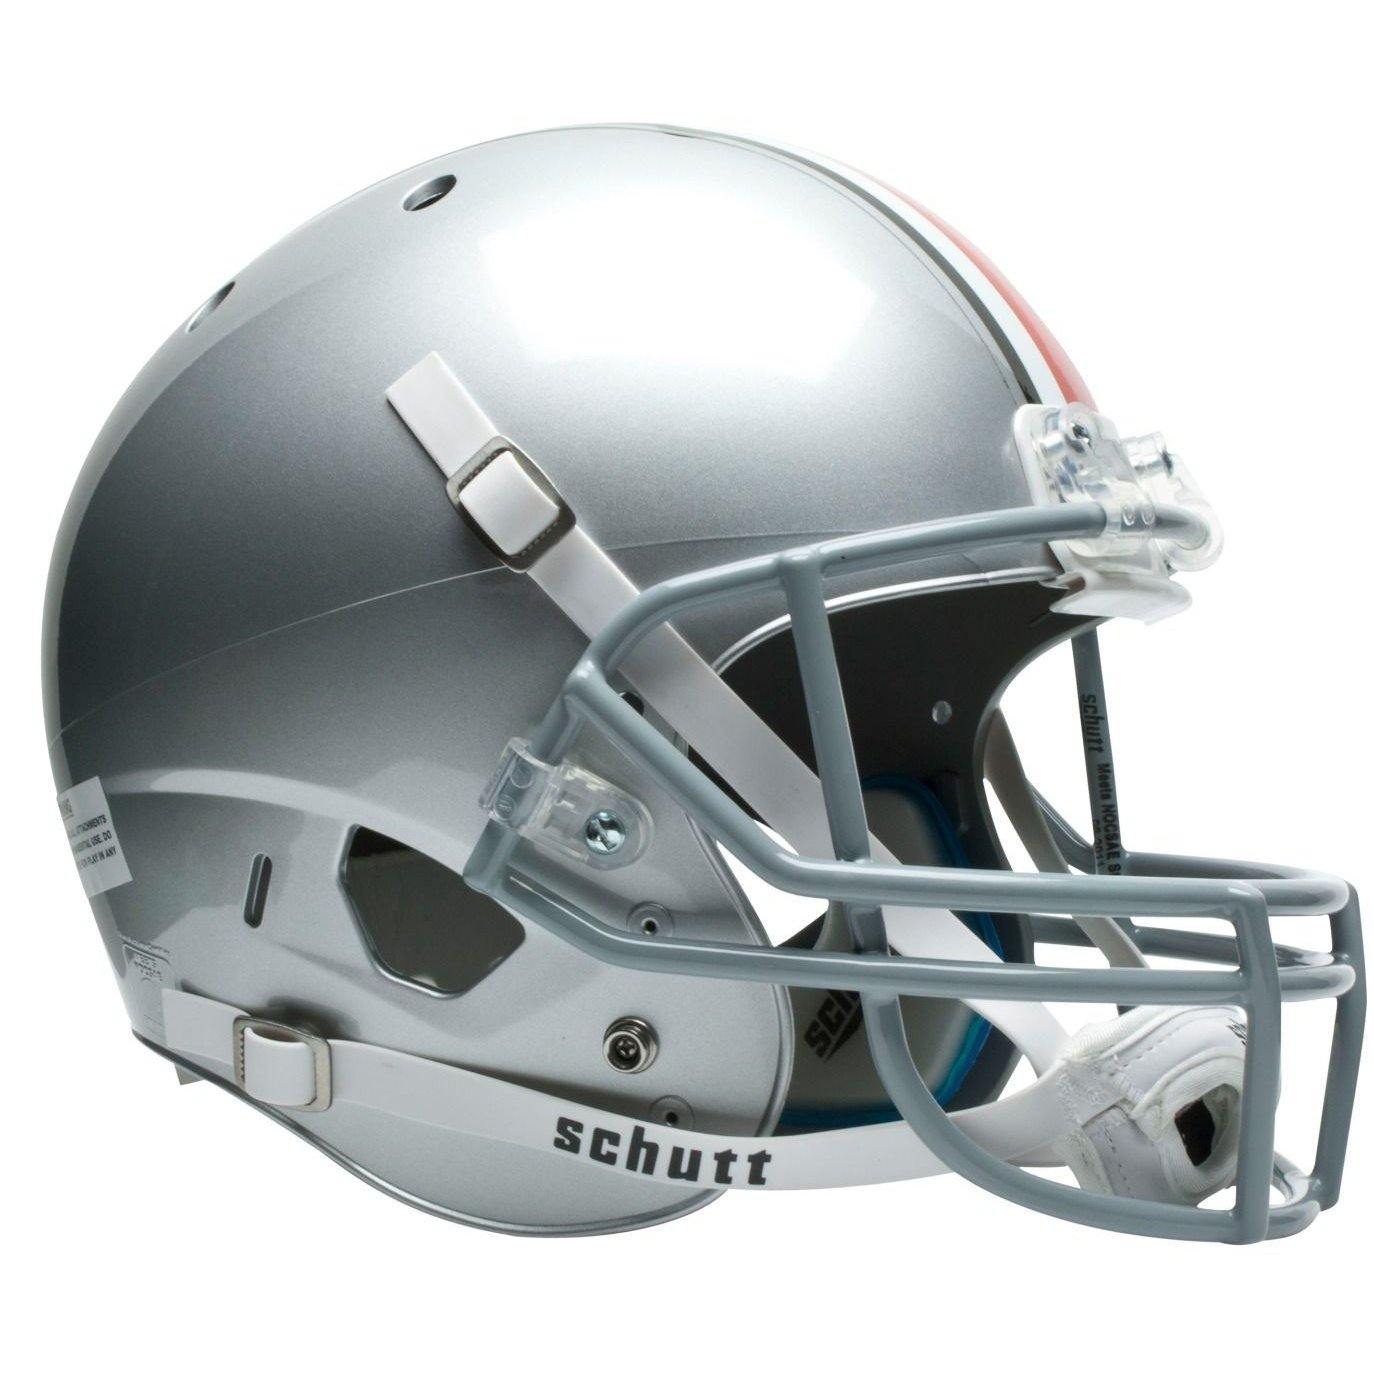 Ohio State Buckeyes College Football Collectible Schutt Mini Helmet - Picture Inside - Fanz Collectibles